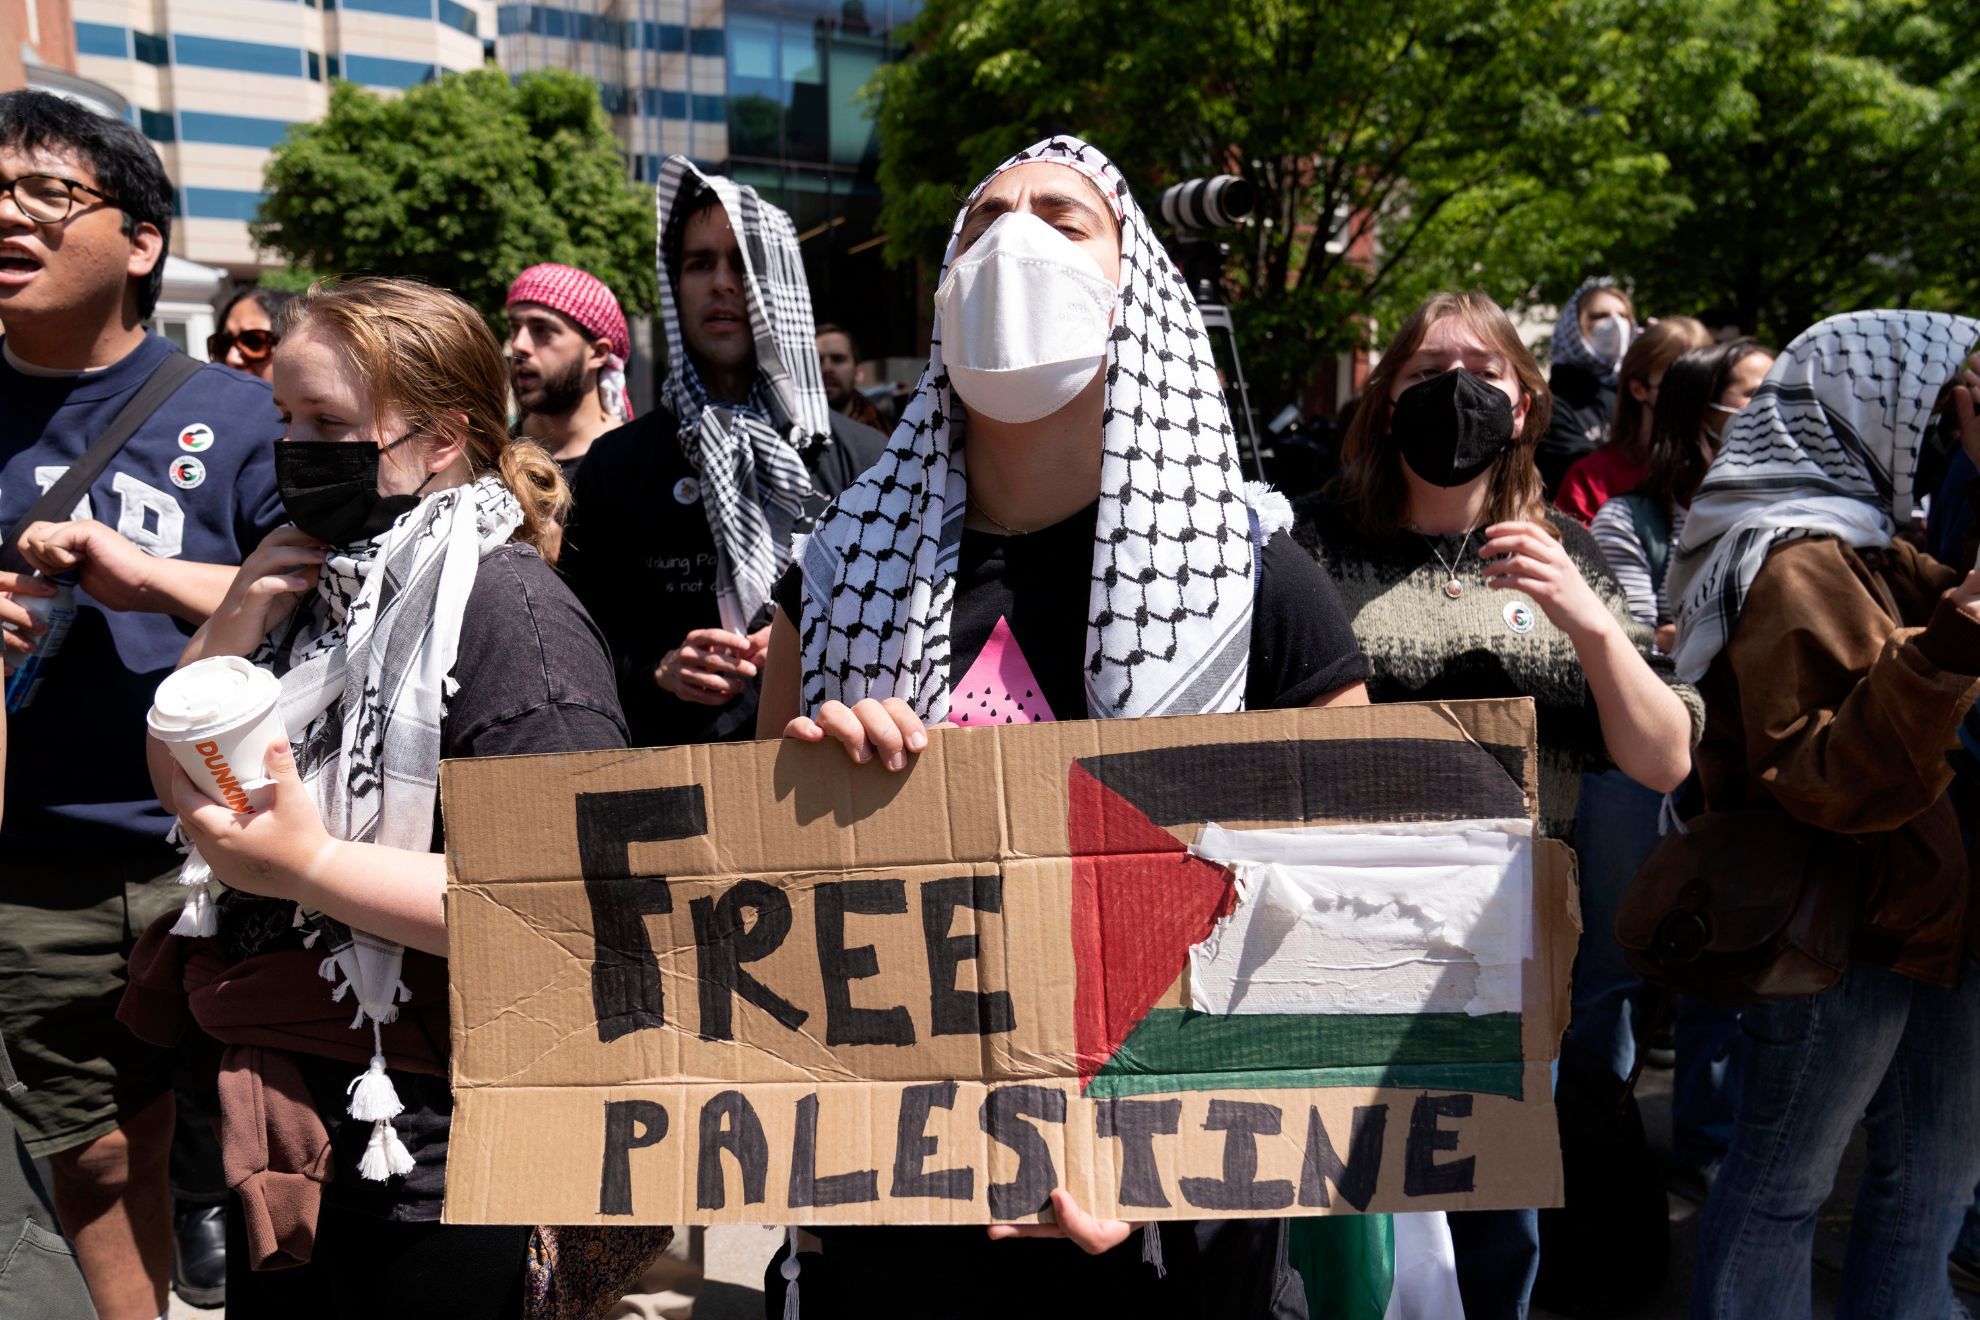 Pro-Palestine protesters at Columbia University